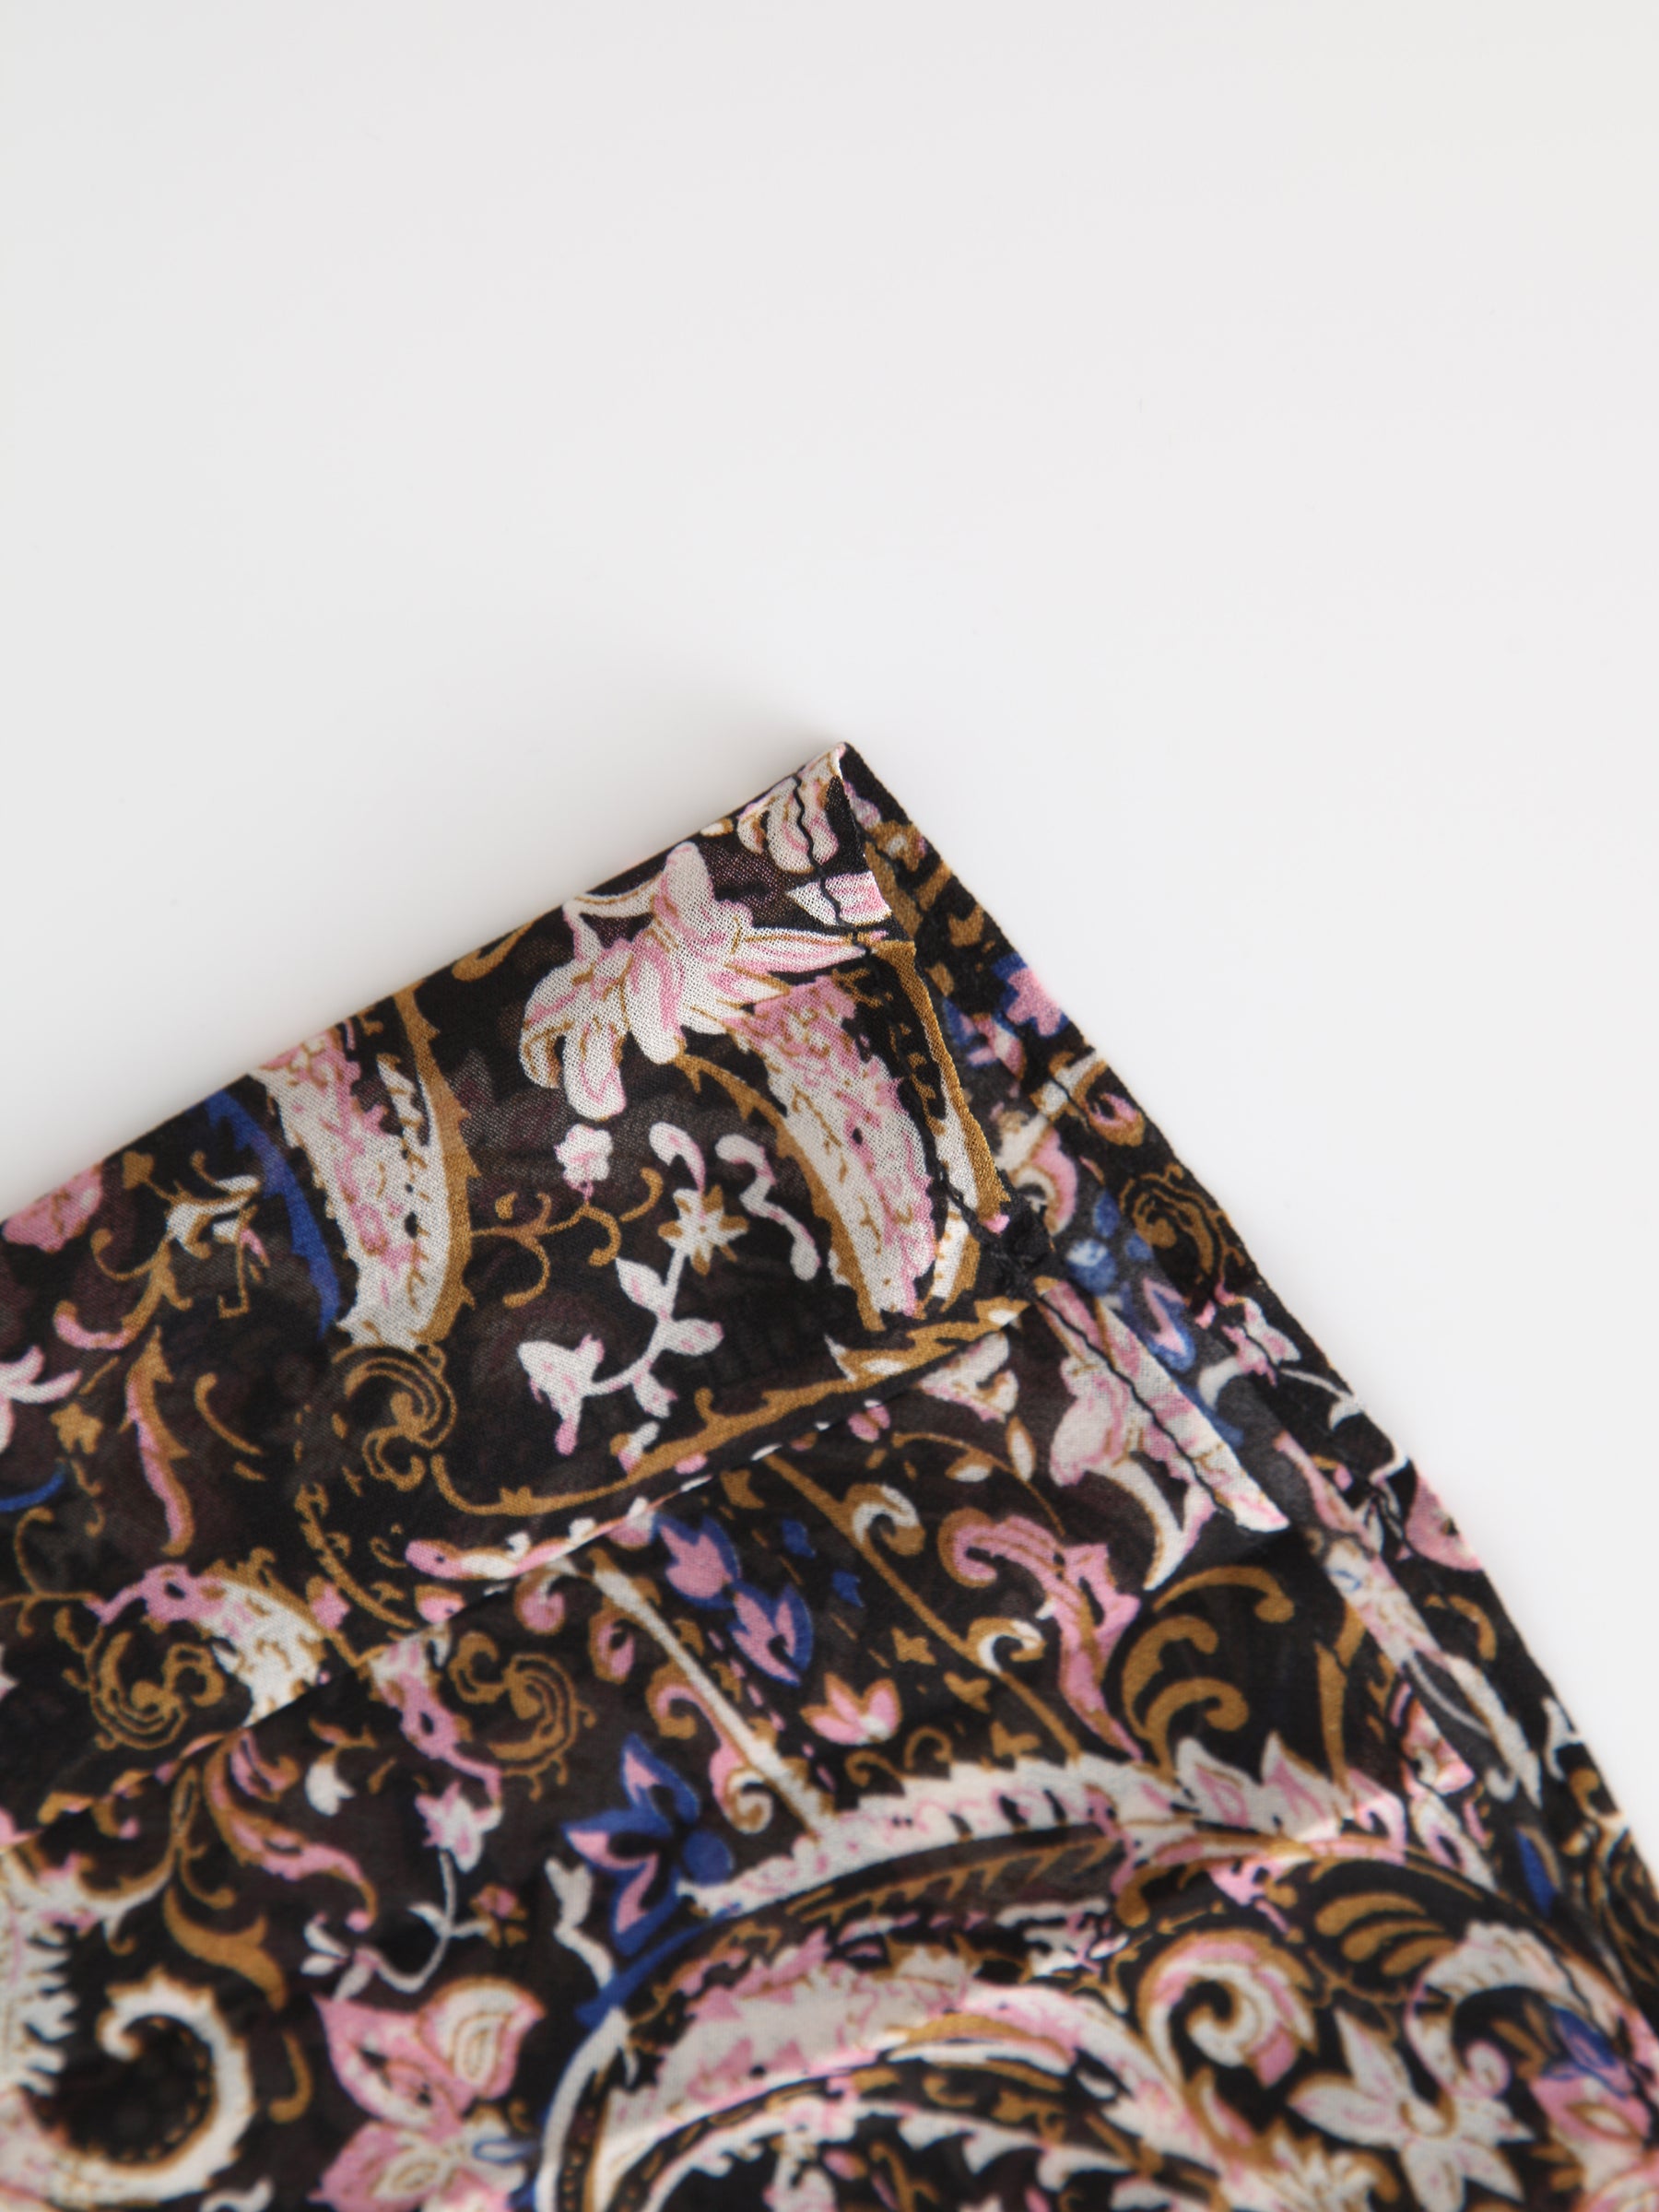 Printed Pleated Skirt 37"-Colored Paisley